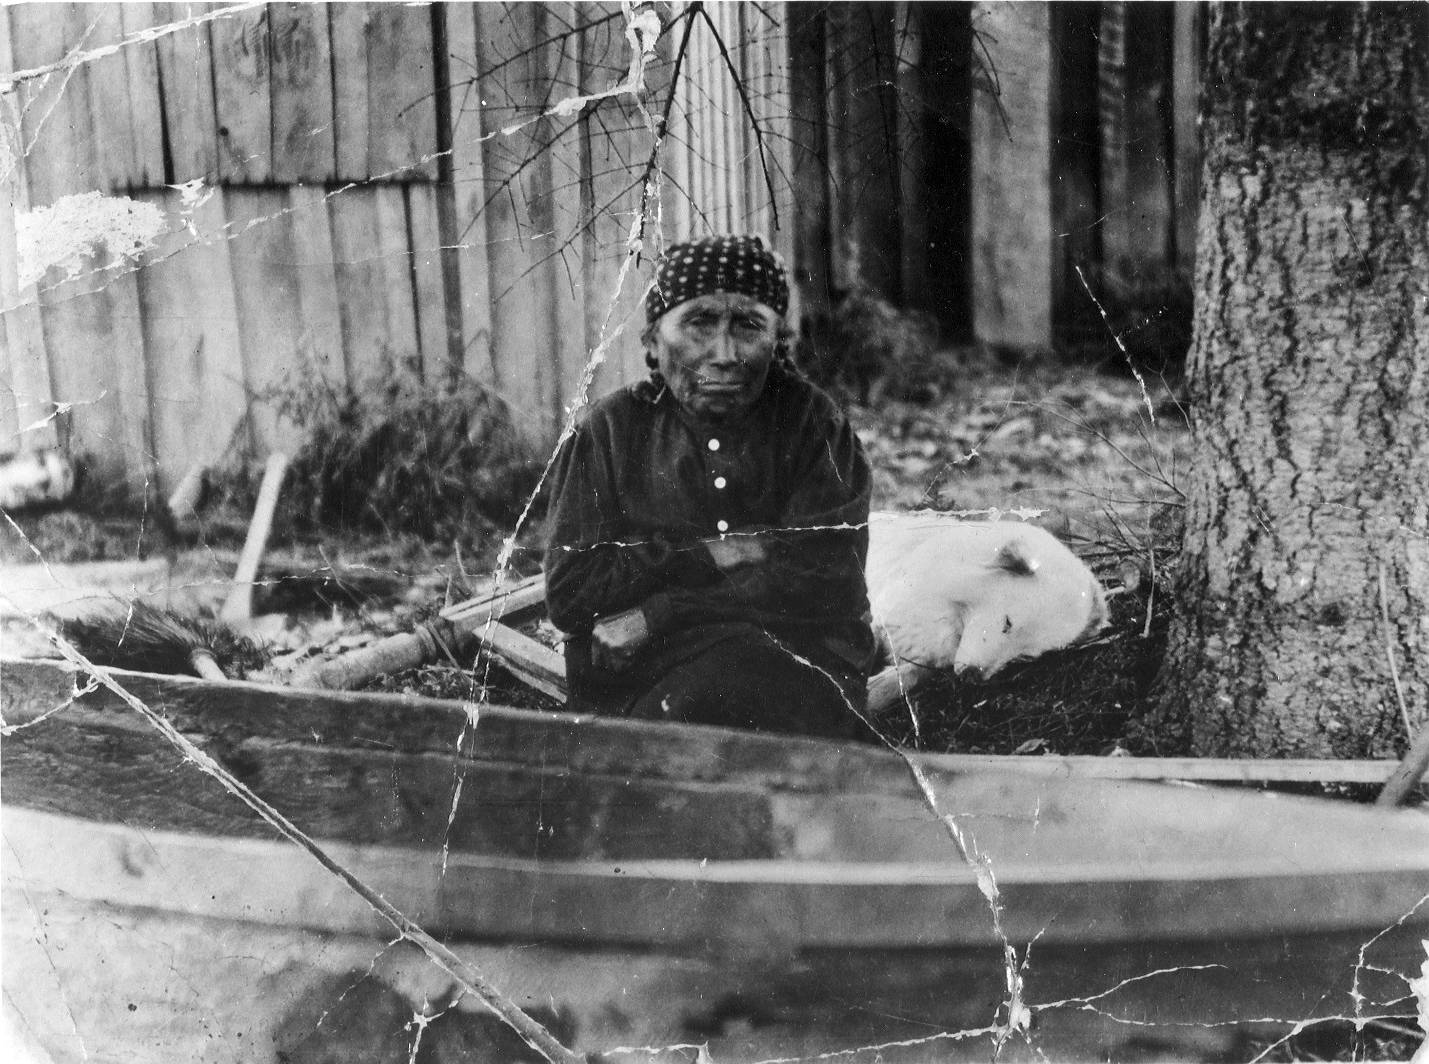 &lt;em&gt;Suquamish Tribe member Mary Adams and her woolly dog, Jumbo.&lt;/em&gt;                                Suquamish Museum Archives/Courtesy